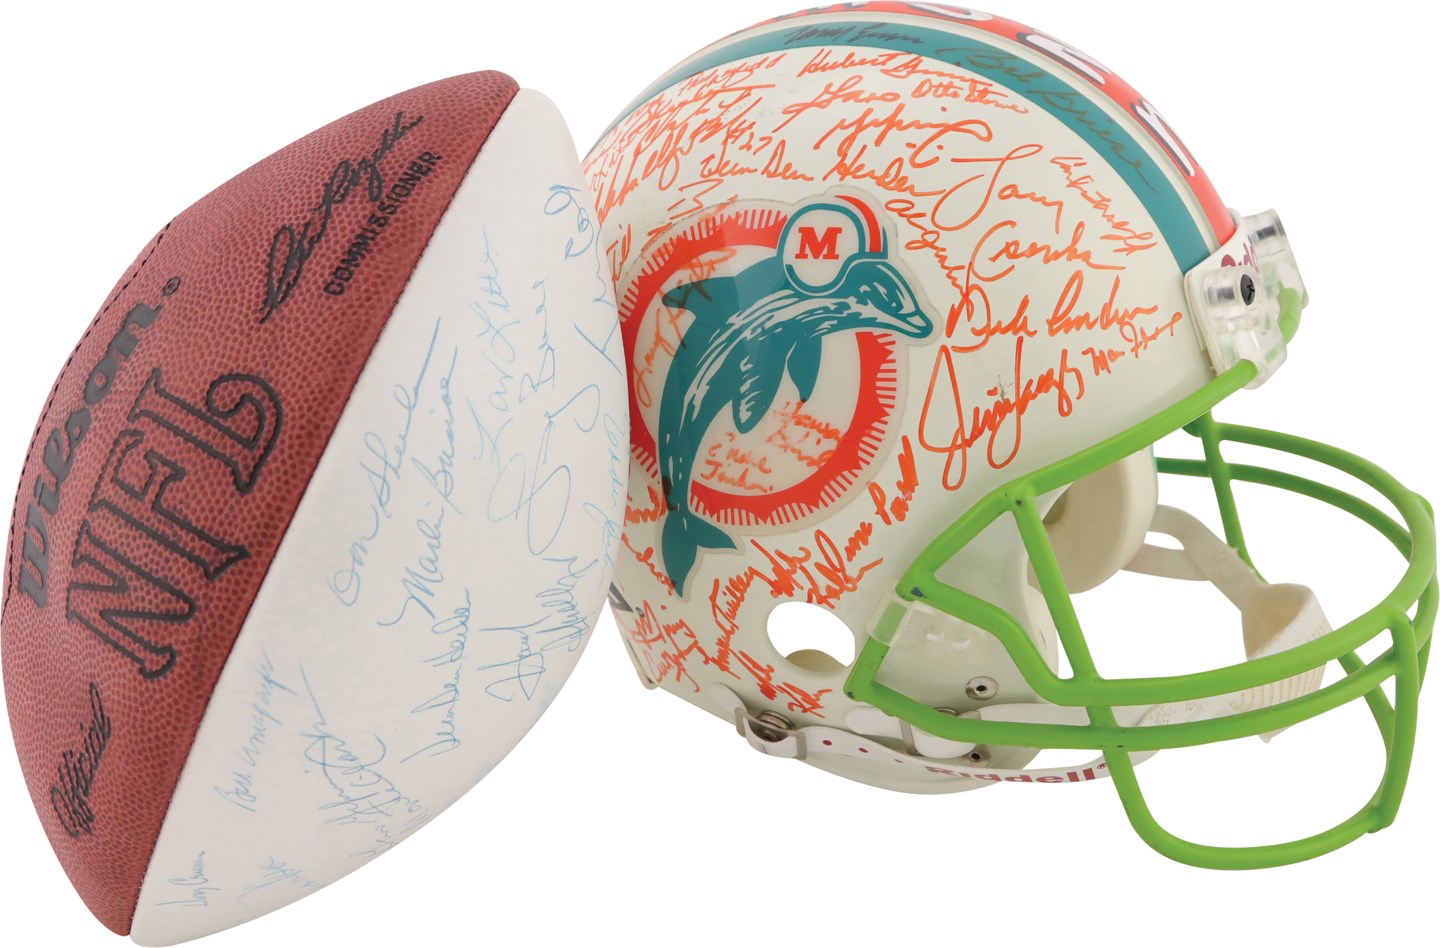 - 1972 Miami Dolphins Team-Signed Football and Limited Edition Hand Painted Team-Signed Helmet